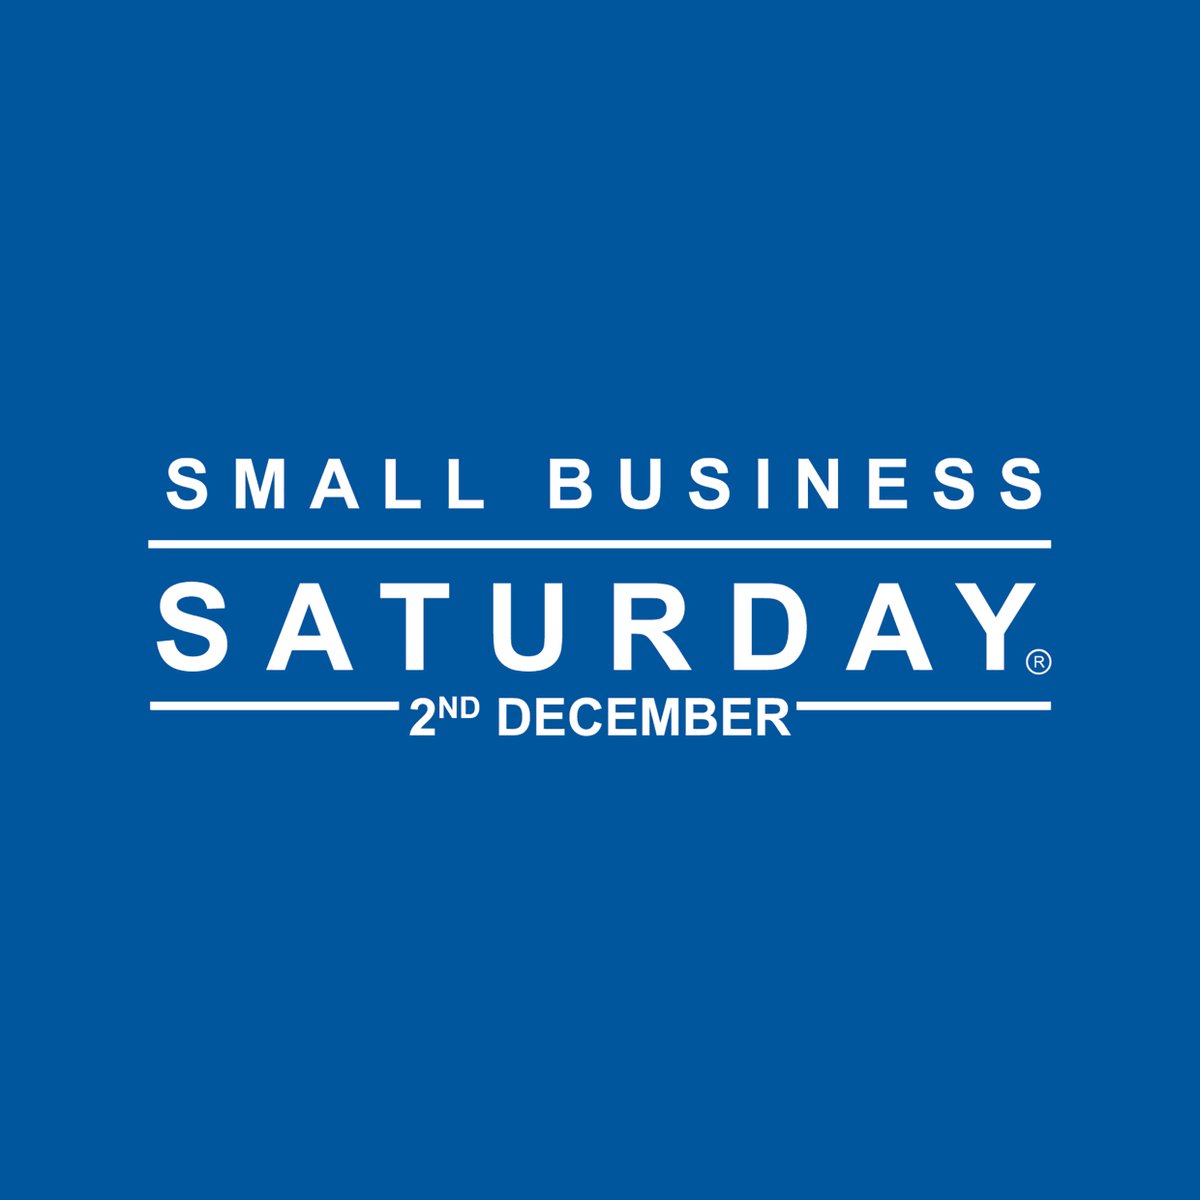 Did you know it's Small Business Saturday today? Our nationwide network of STIHL Approved Dealers includes many local, independent businesses who provide a personalised service and expert knowledge. Find your nearest one here: shop.stihl.co.uk/pages/dealer-l…